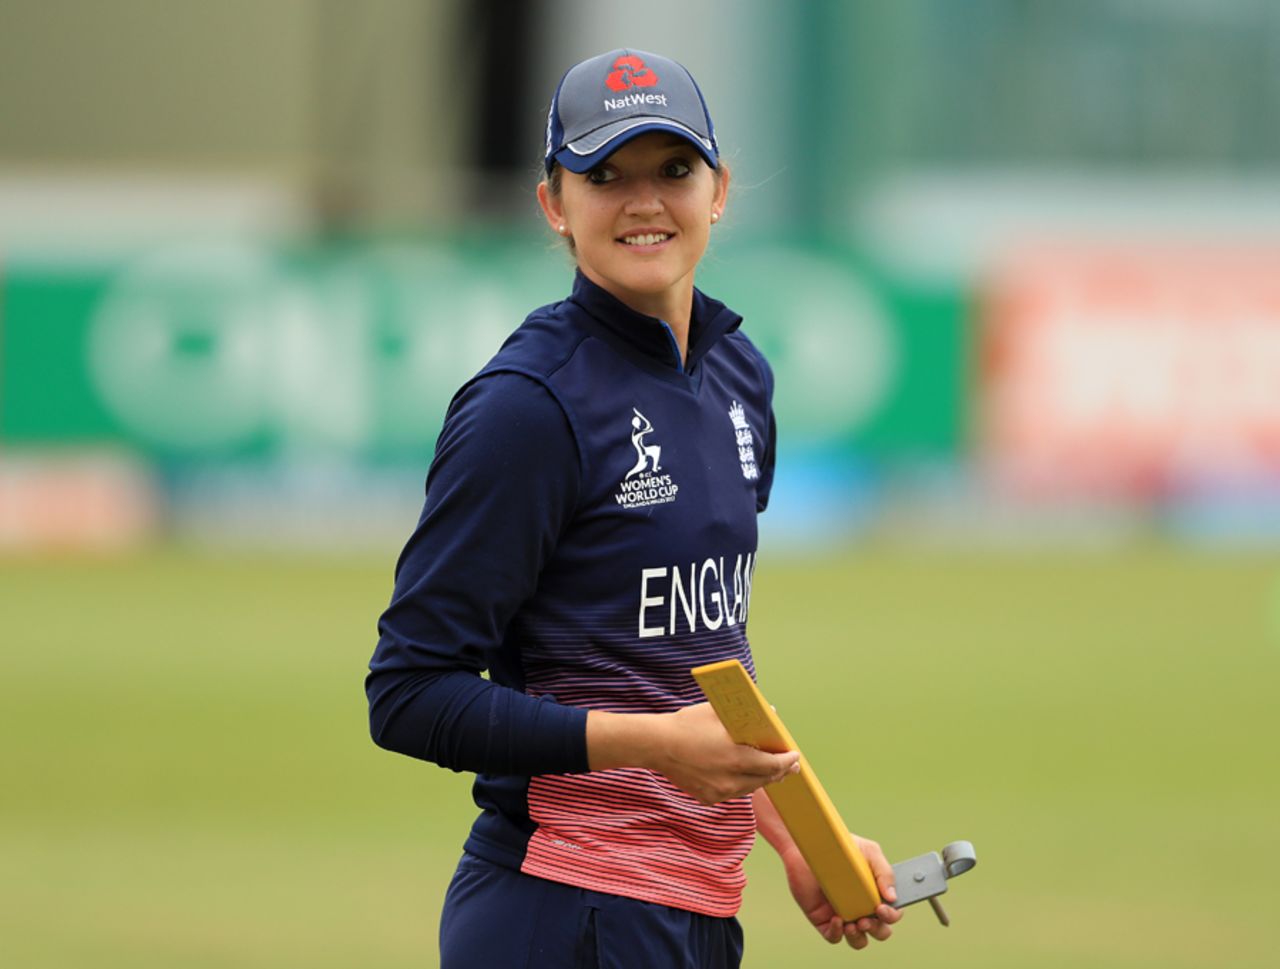 Sarah Taylor reacts while engaging in a fielding drill, England v Pakistan, Women's World Cup, Leicester, June 27, 2017